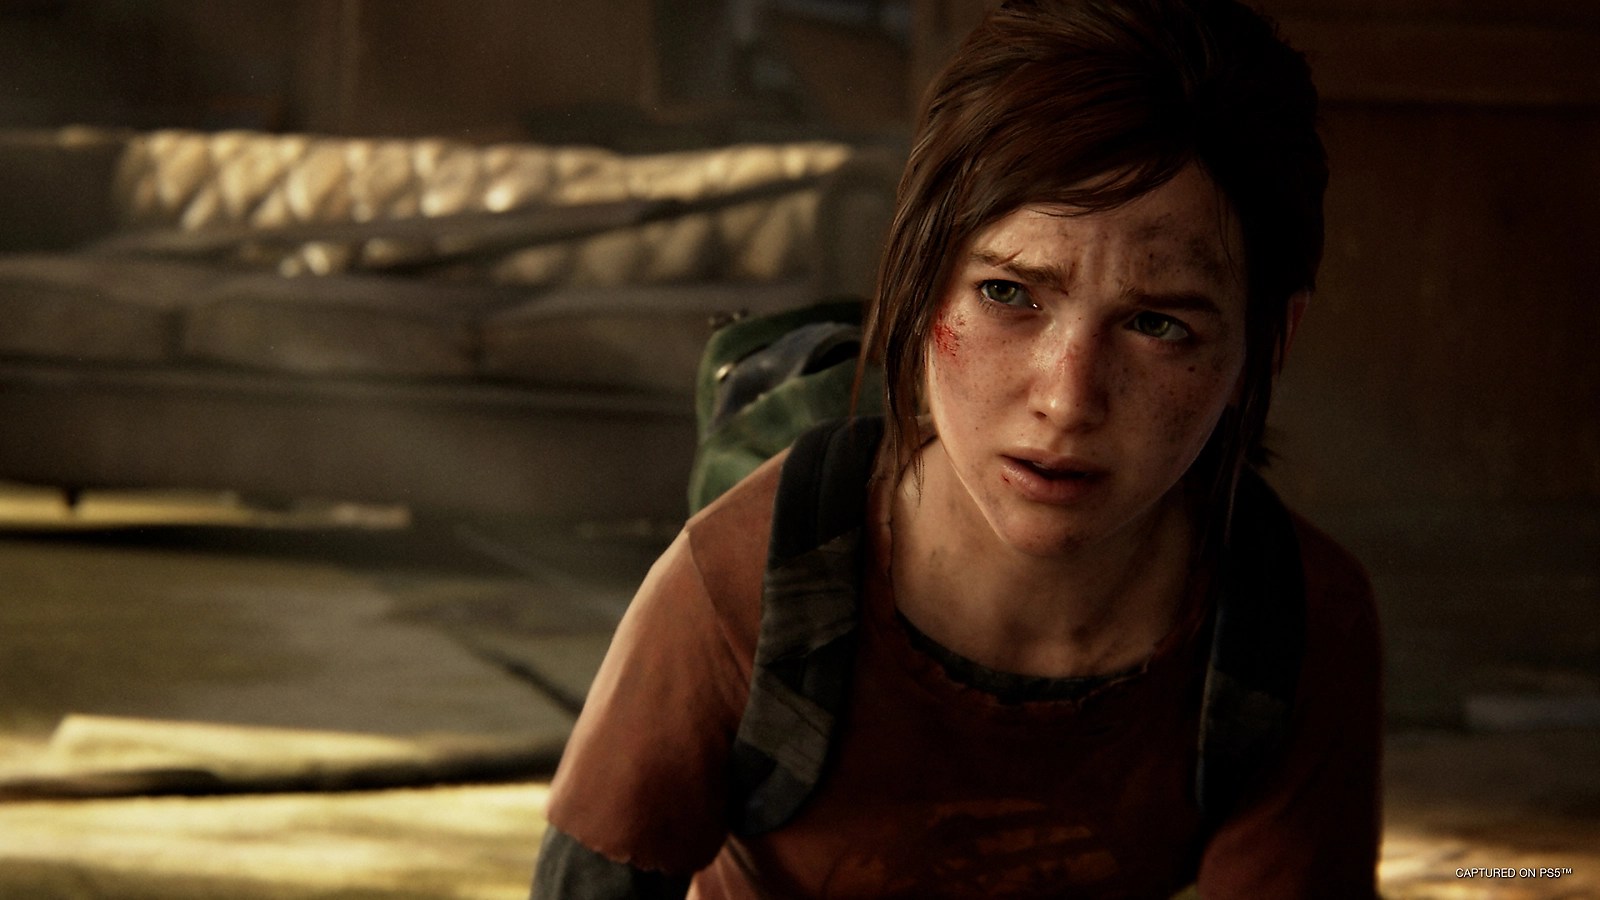 The Last of Us PC port gets a GPU requirement downgrade - and